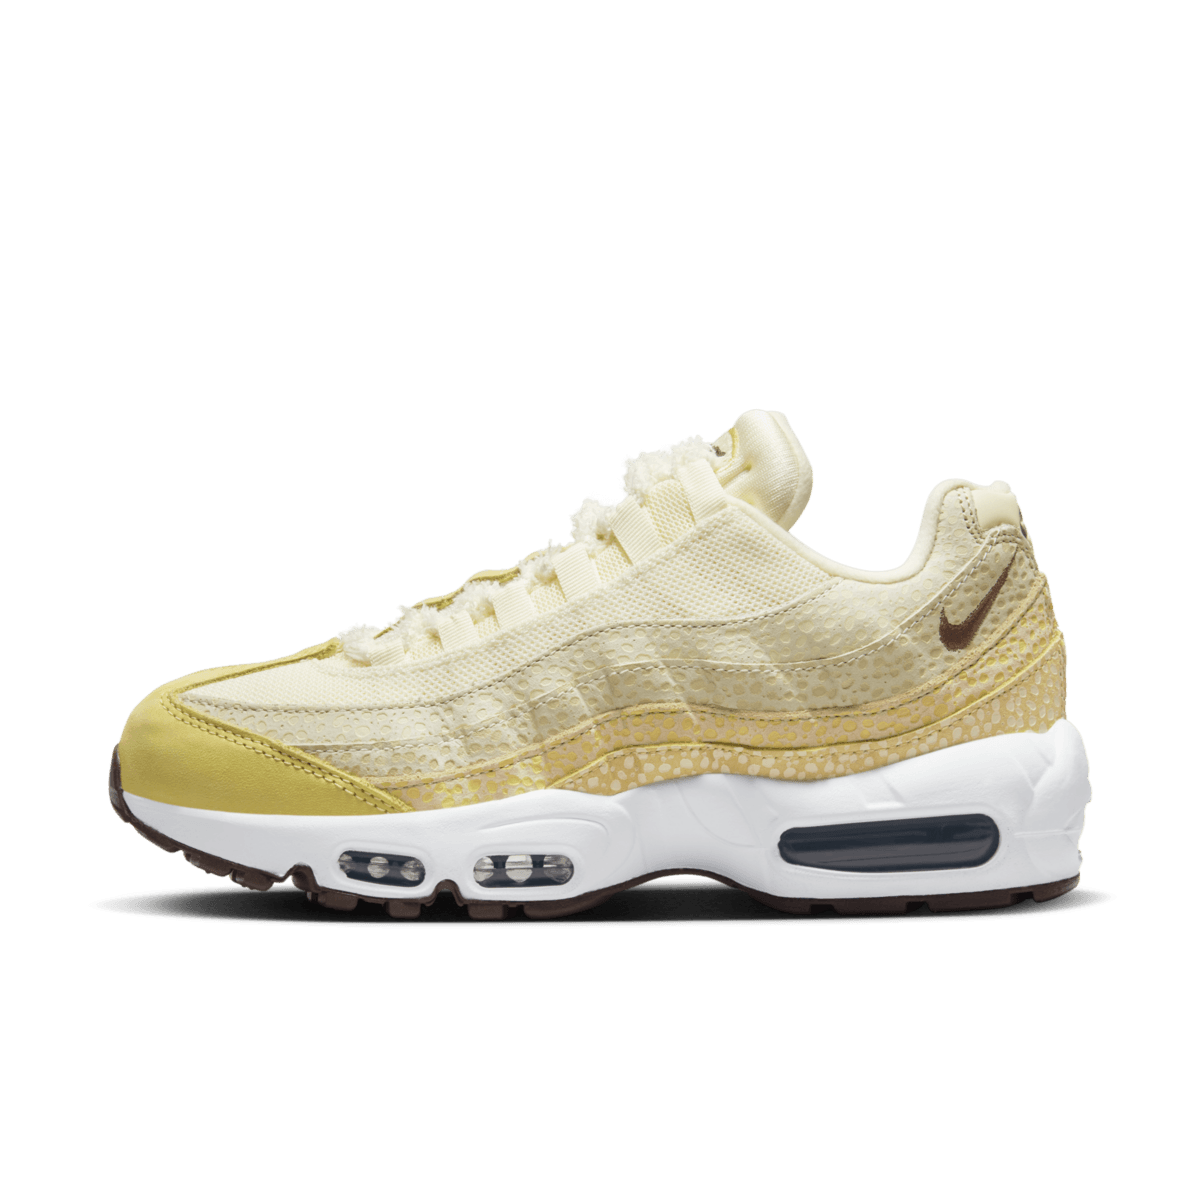 Nike Air Max 95 WMNS 'Saturn Gold and Alabaster'